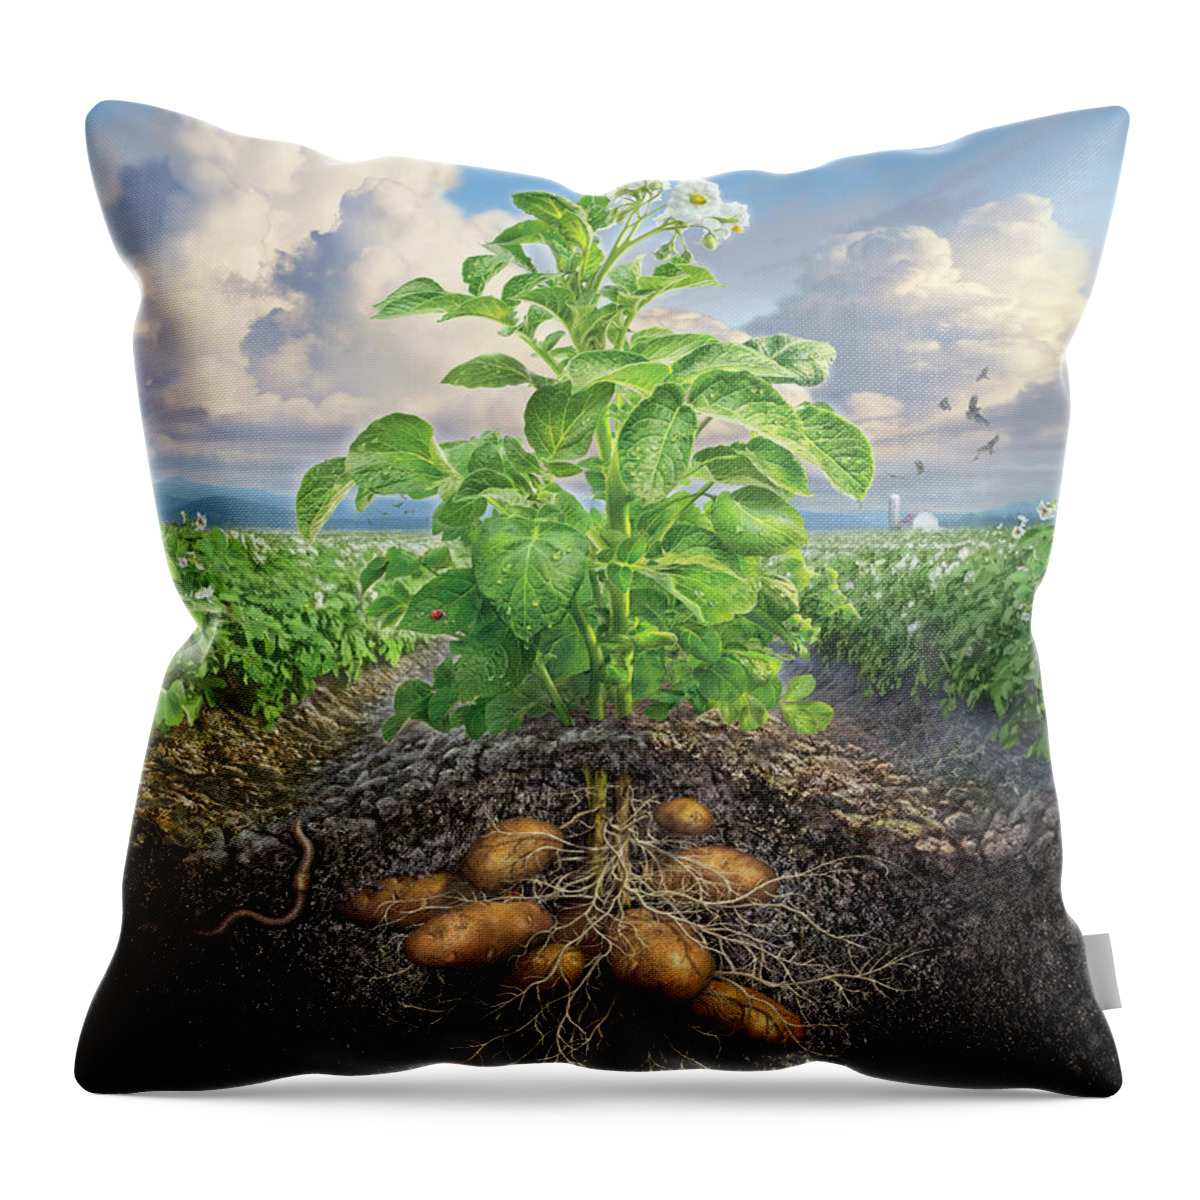 Potato Throw Pillow featuring the digital art The Mighty Russet by Mark Fredrickson